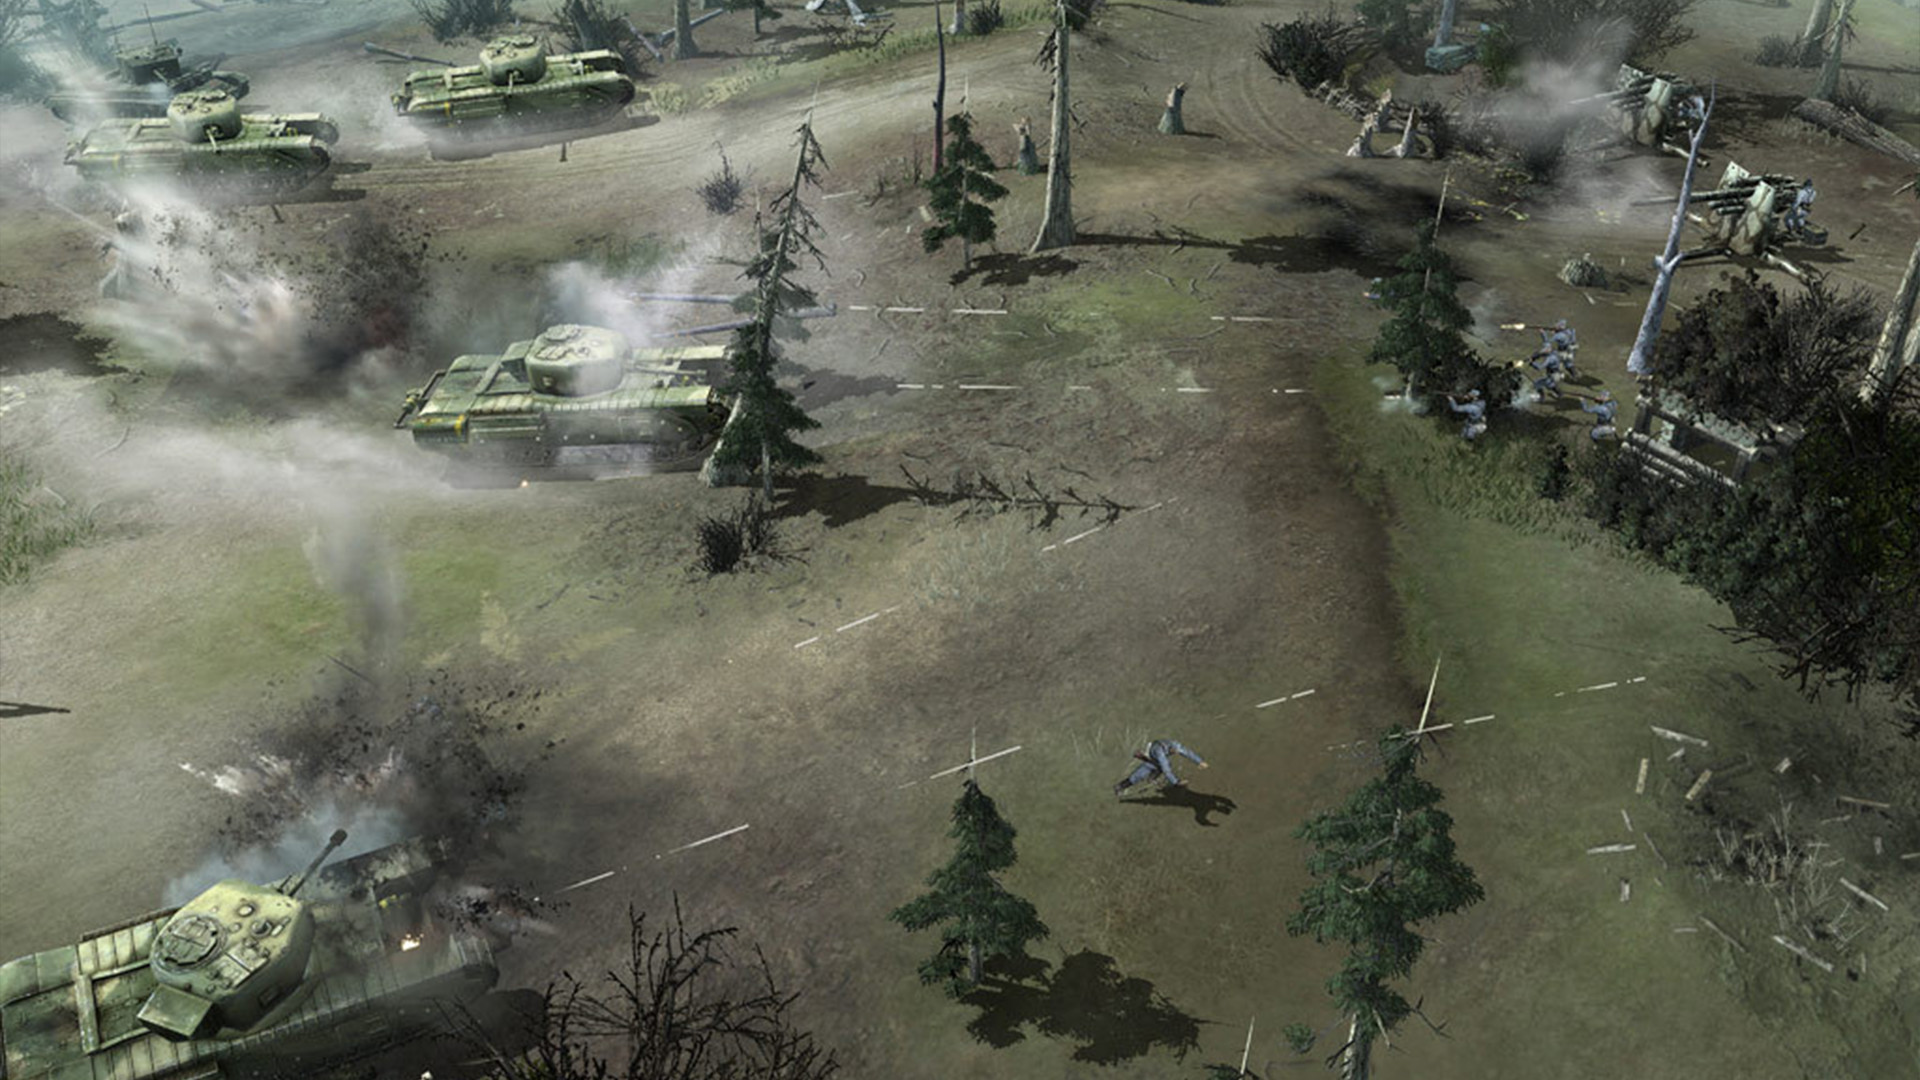 Company of Heroes 2 vs Opposing Fronts